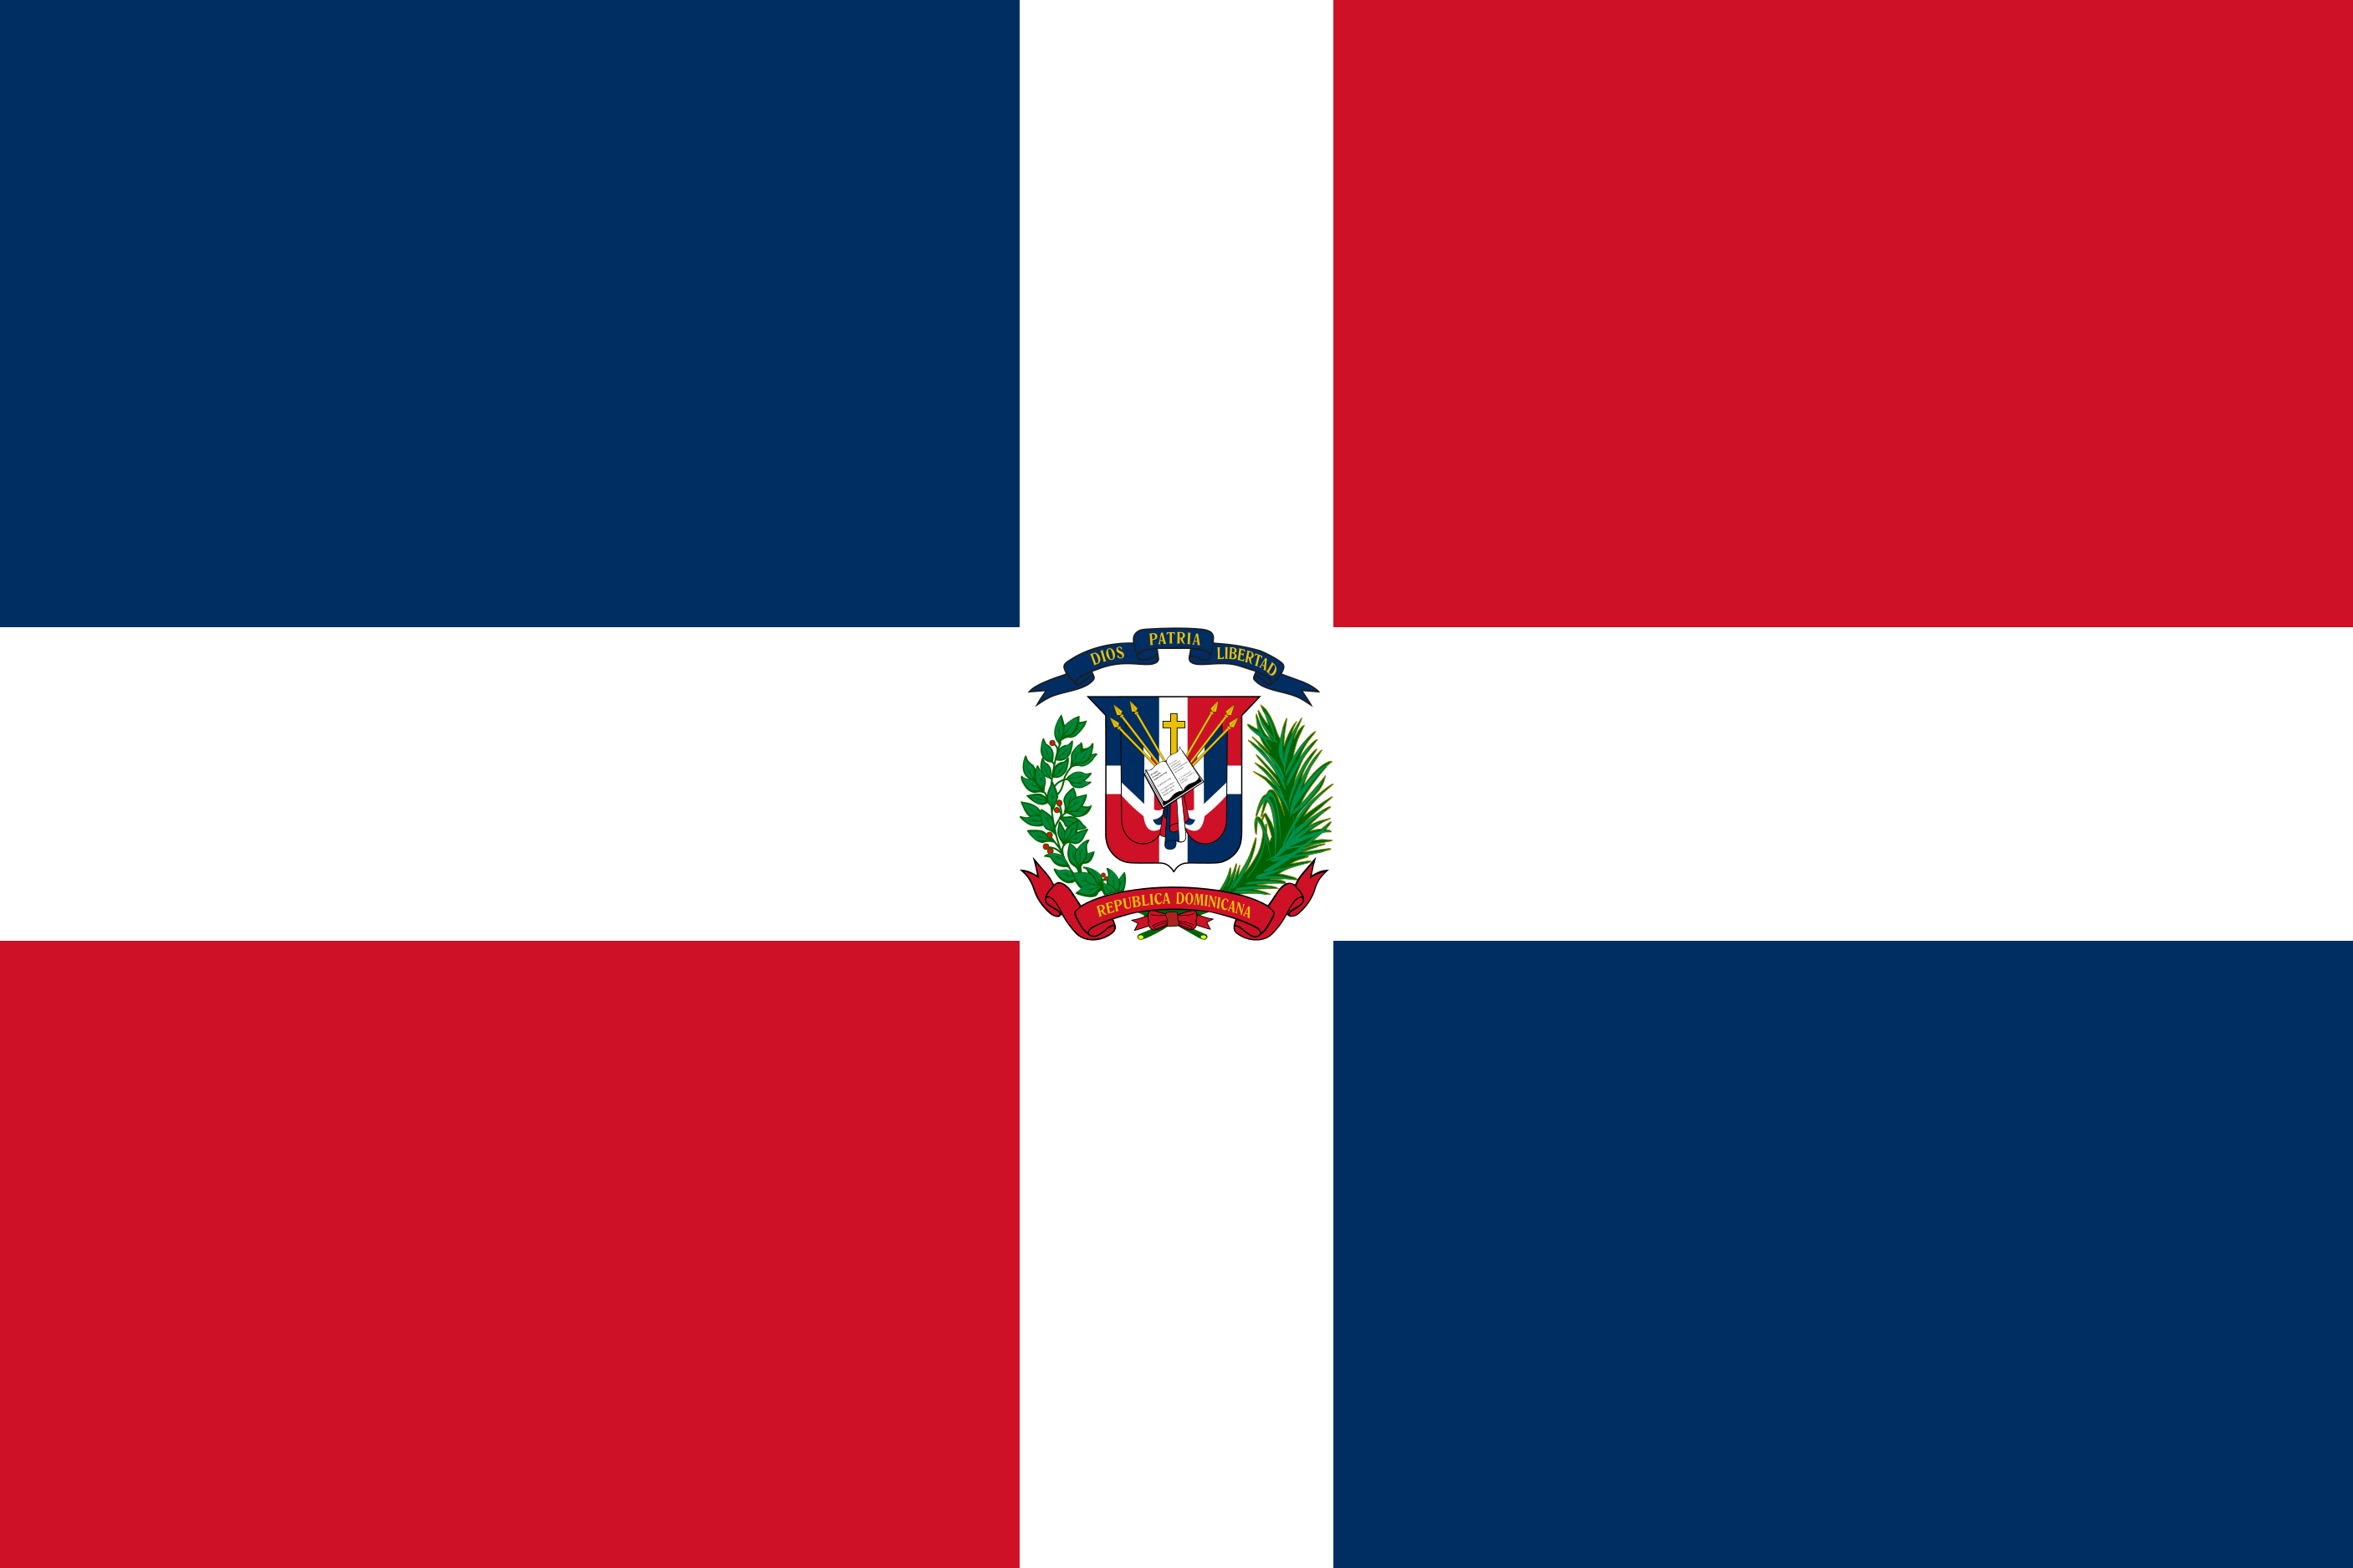 The Dominican Republic Flag Image - Free Download